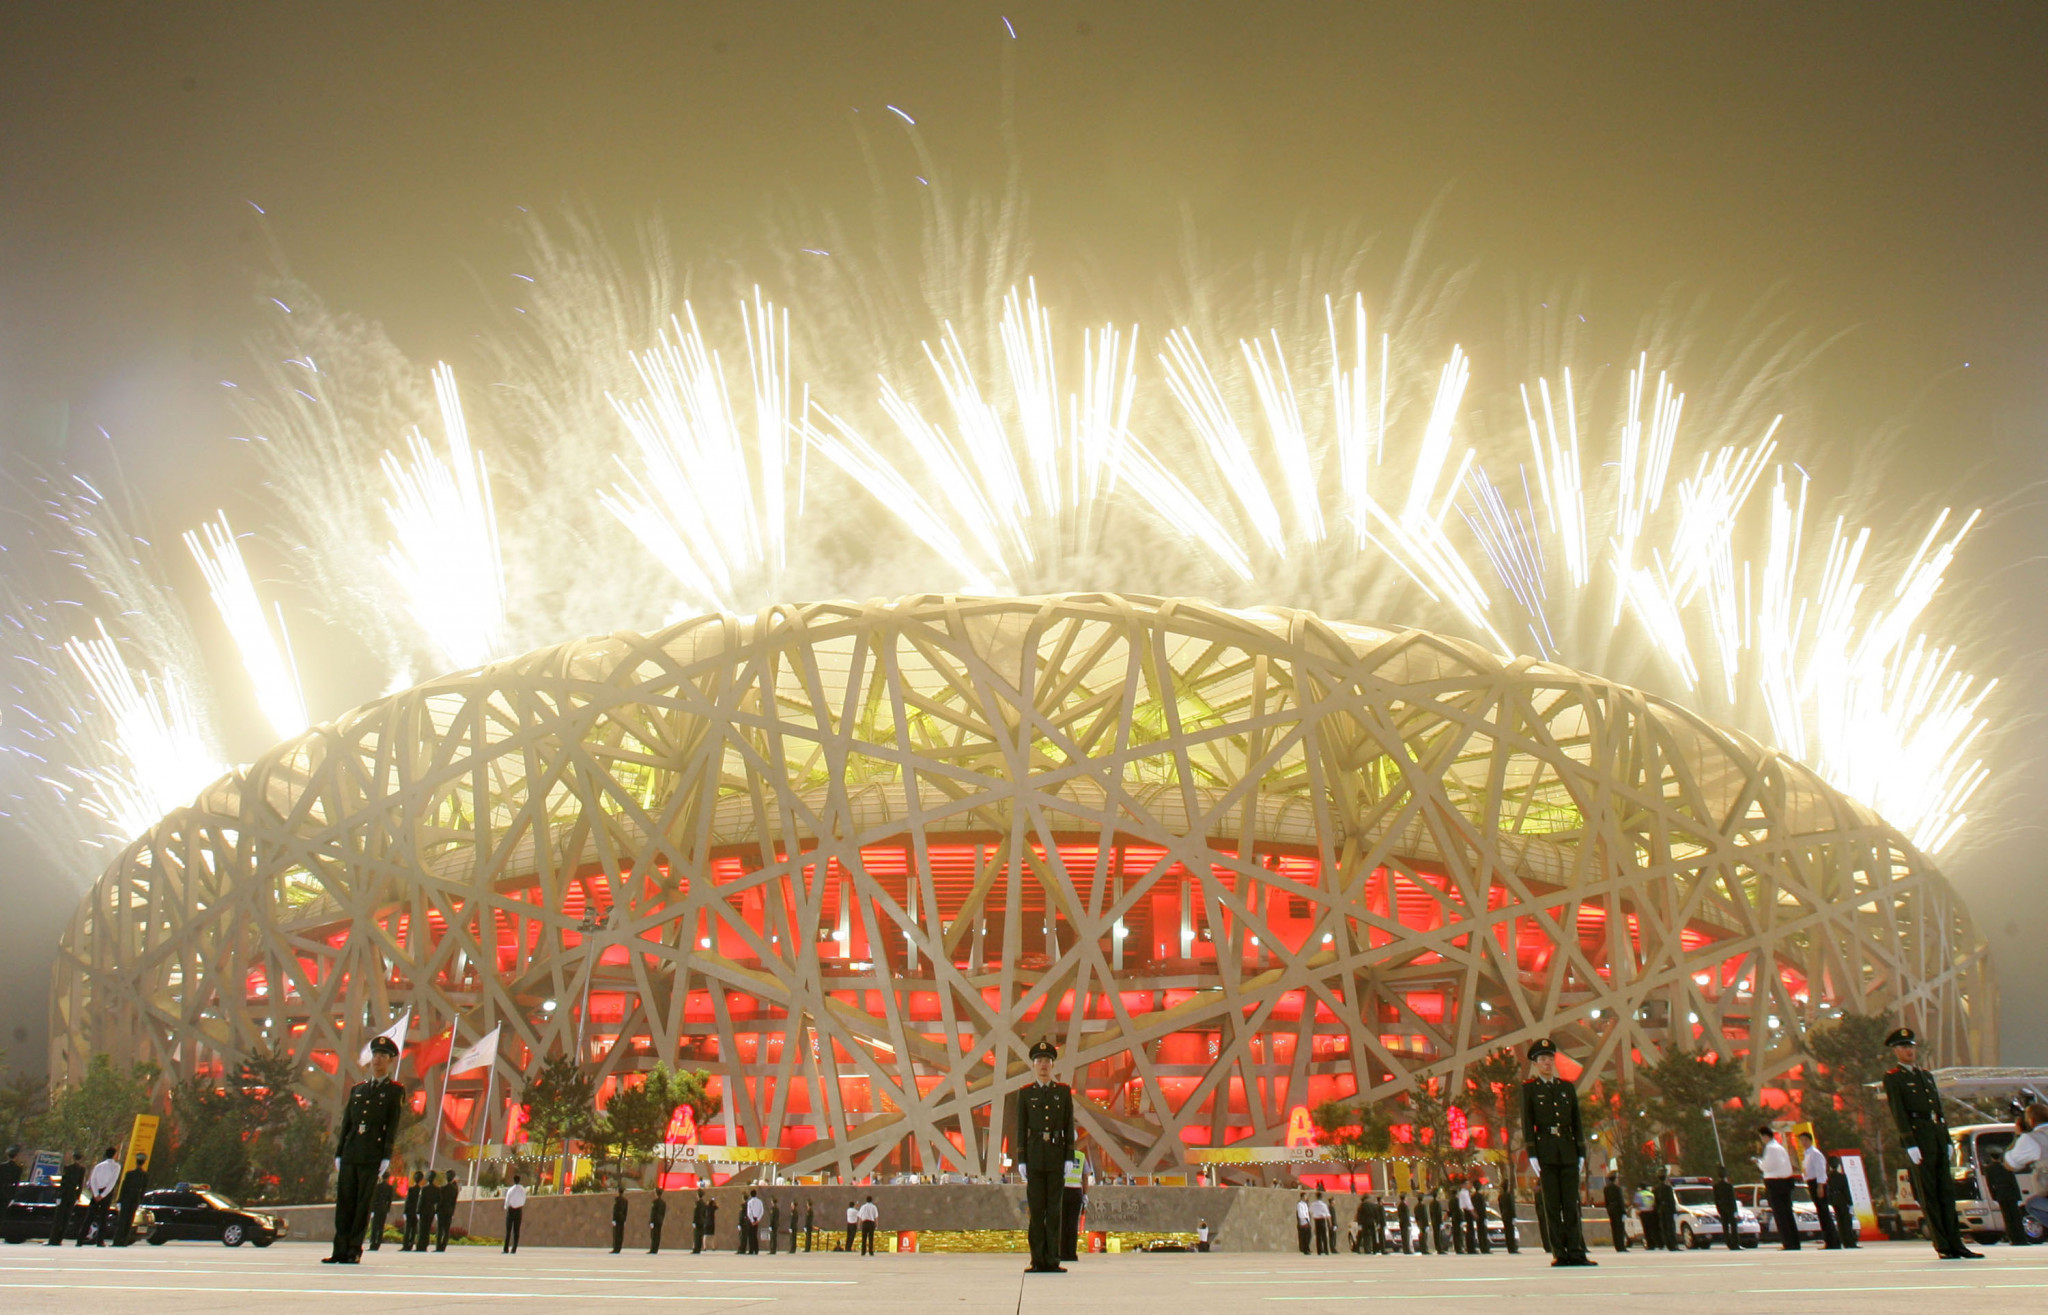 Fireworks go off at the Bird's Nest stadium during the spectacular Opening Ceremony of the Beijing 2008 Olympics ©Getty Images